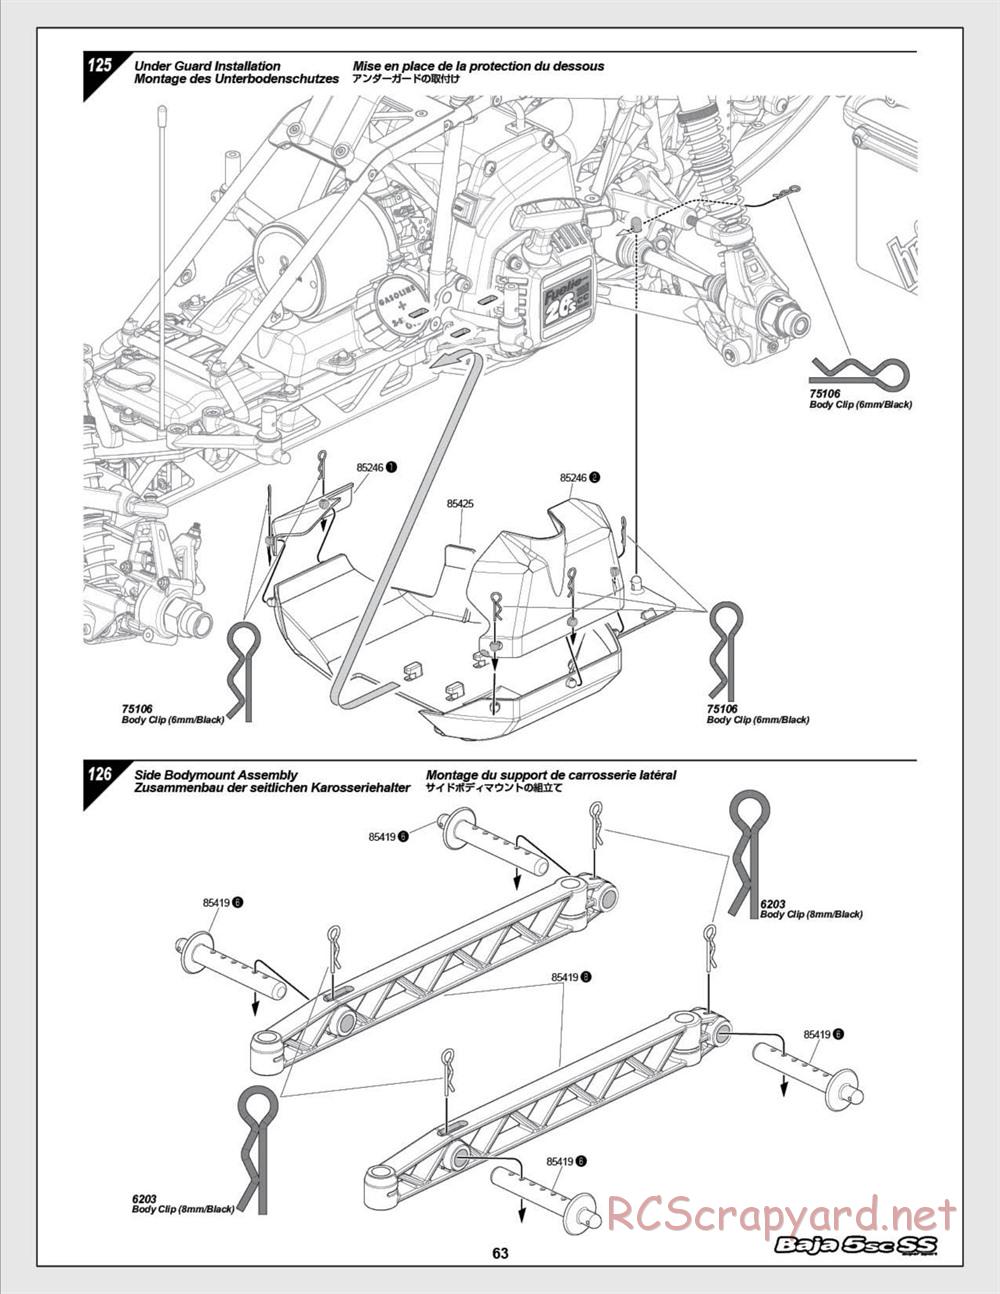 HPI - Baja 5SC SS - Exploded View - Page 63